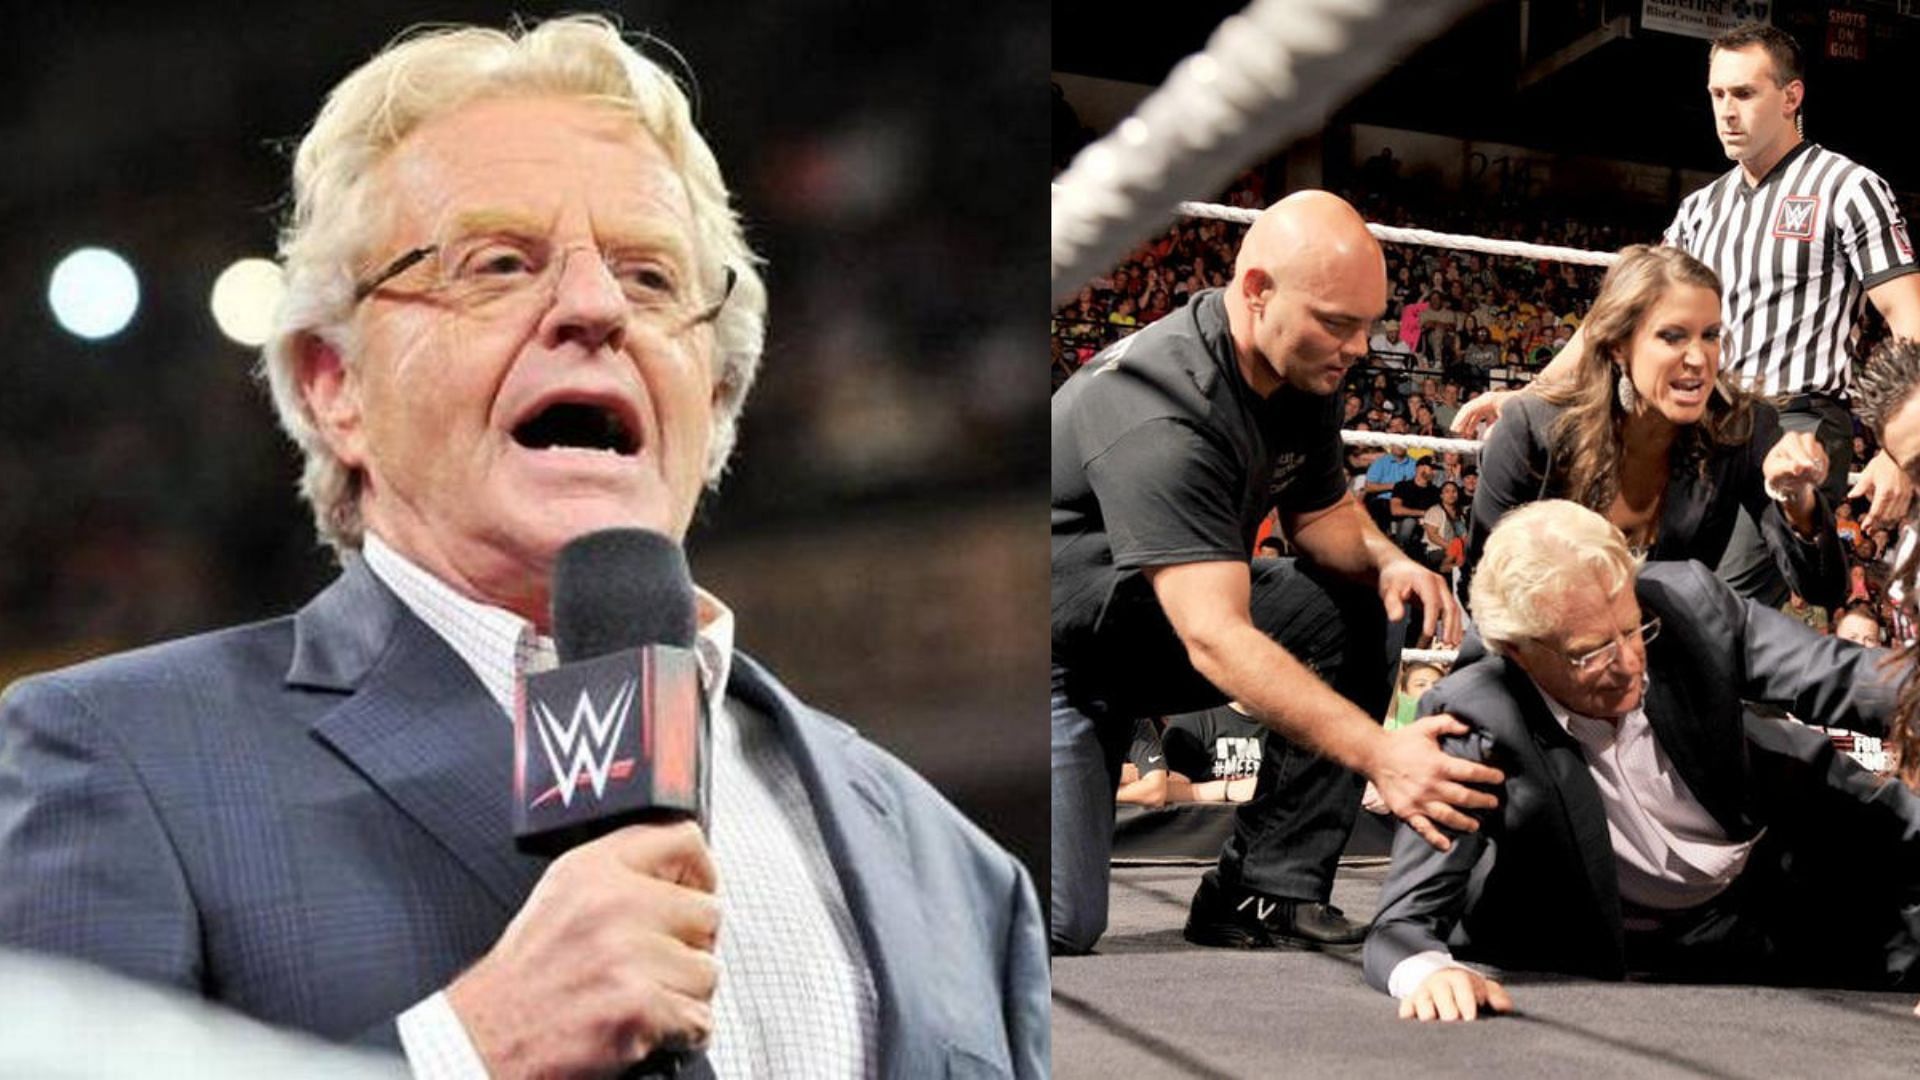 Jerry Springer has a long history in WWE